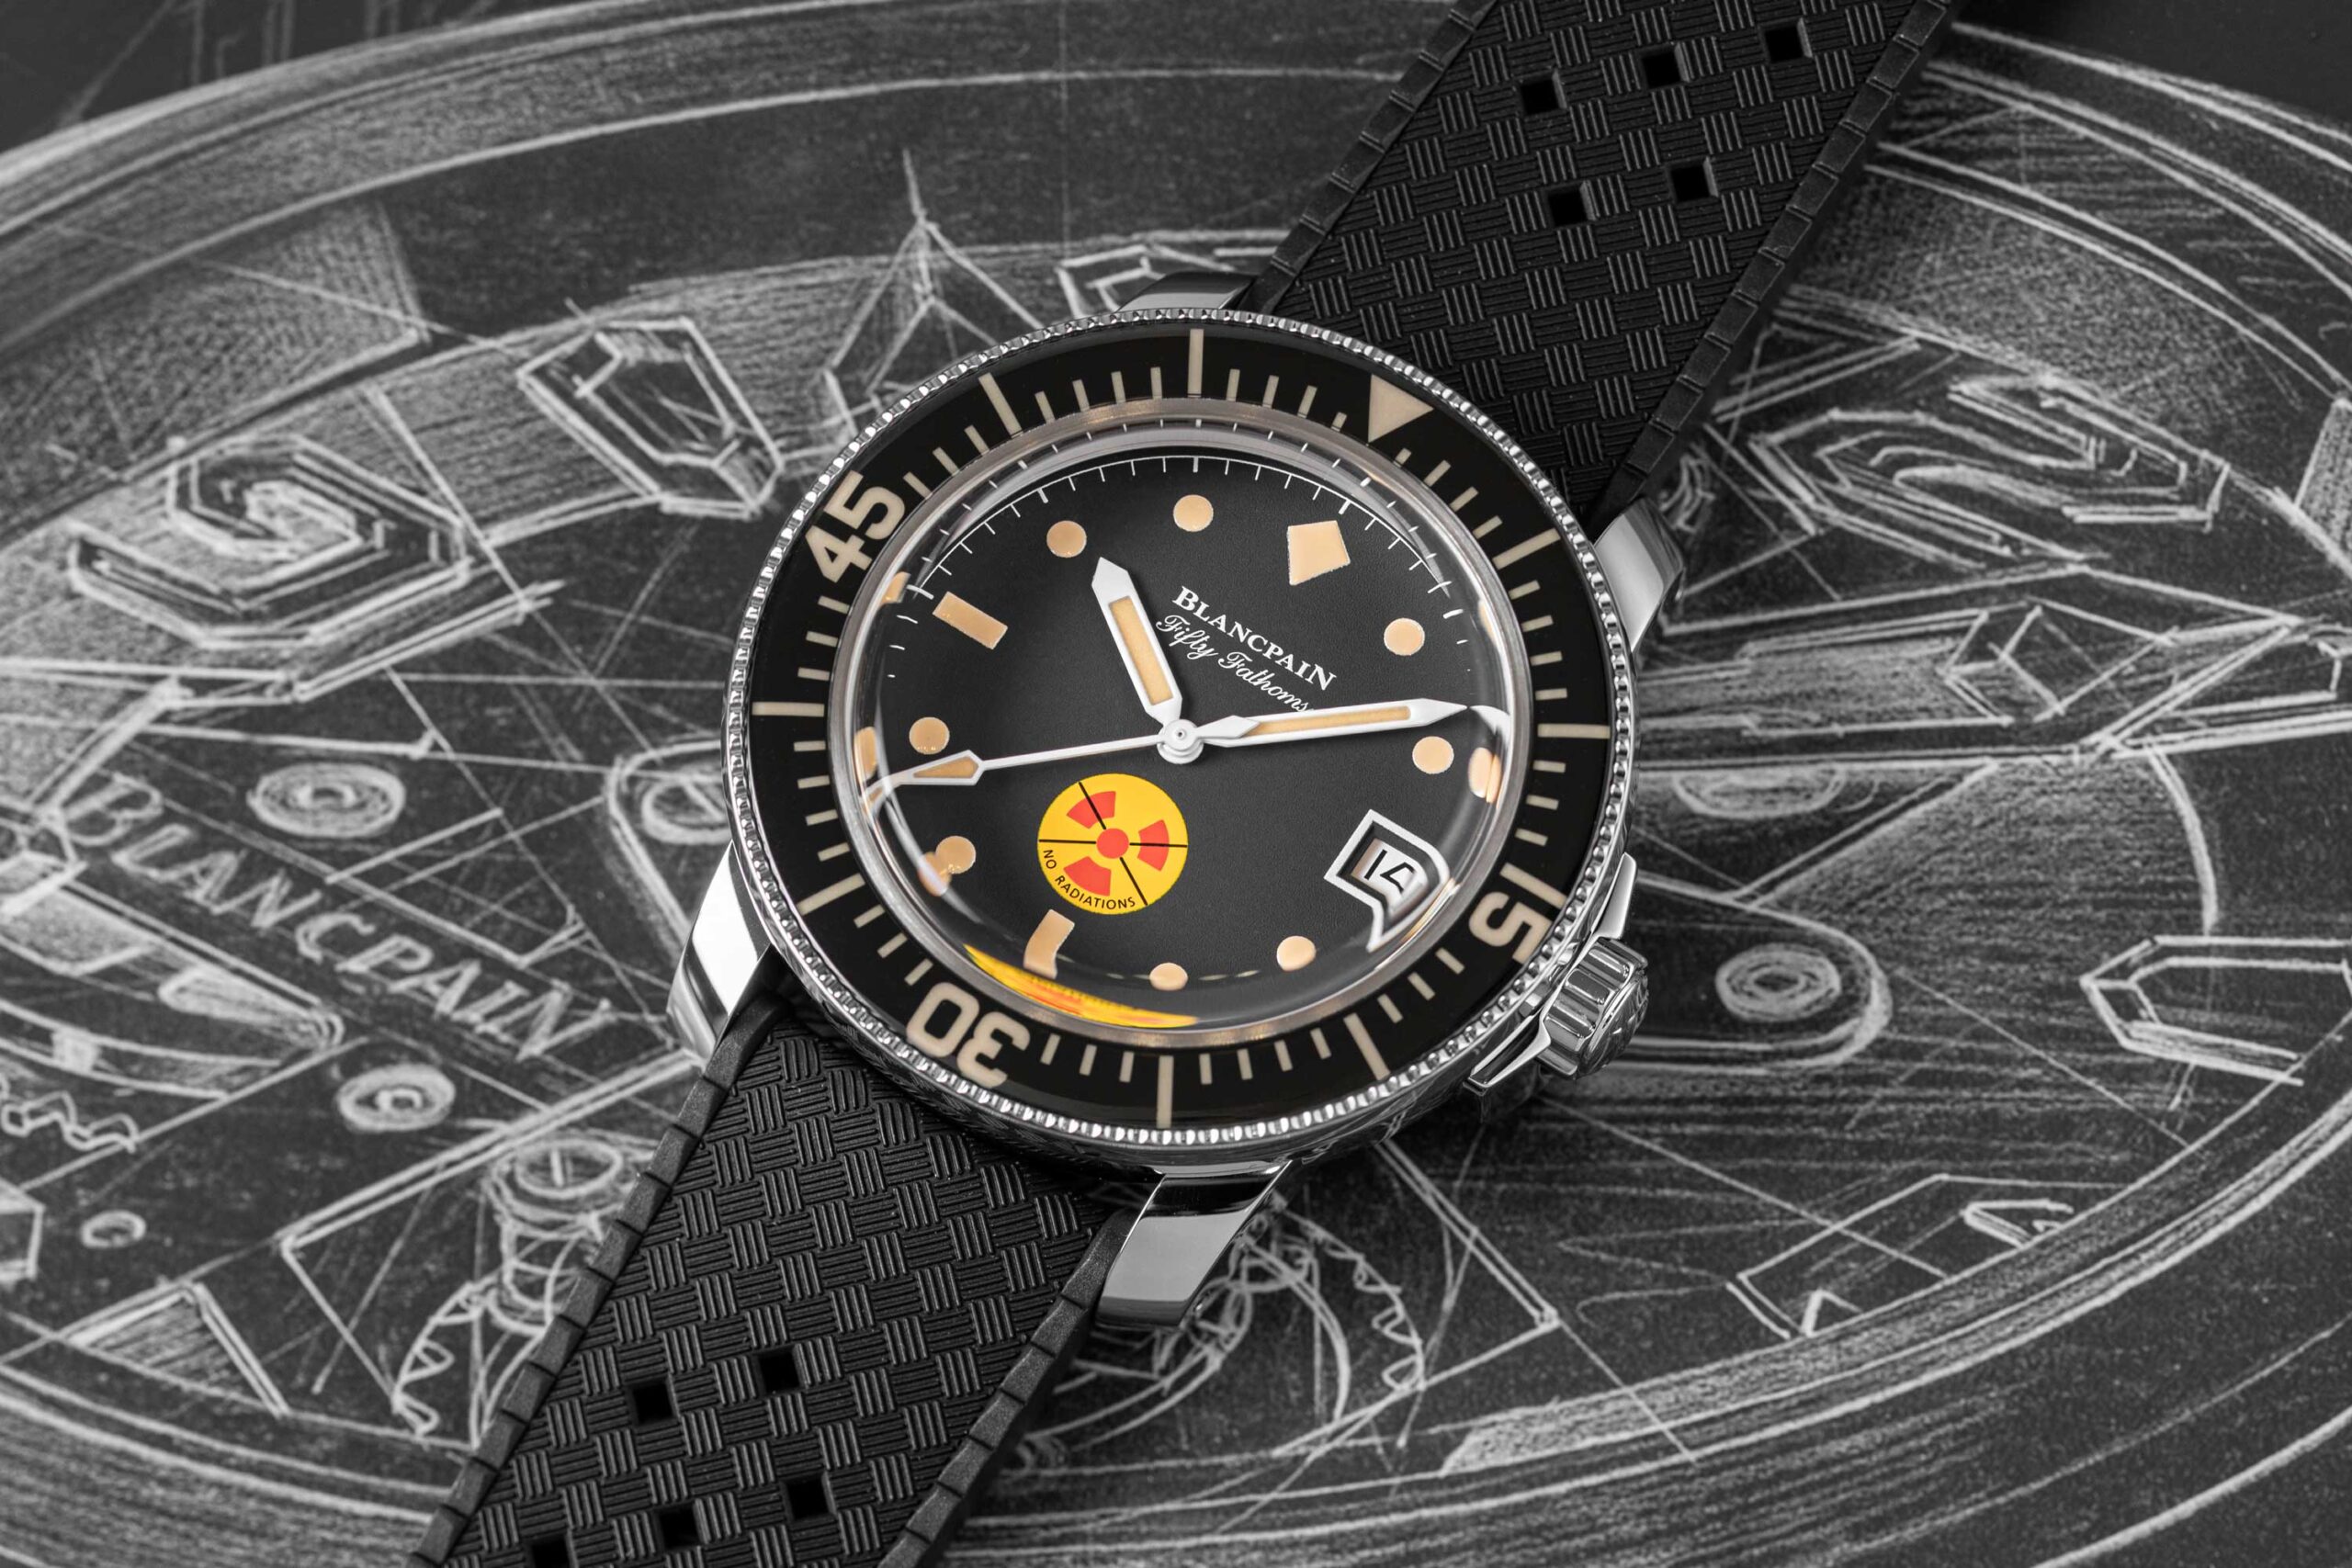 Introducing Blancpain’s Tribute to Fifty Fathoms “No Rad” (©Revolution)